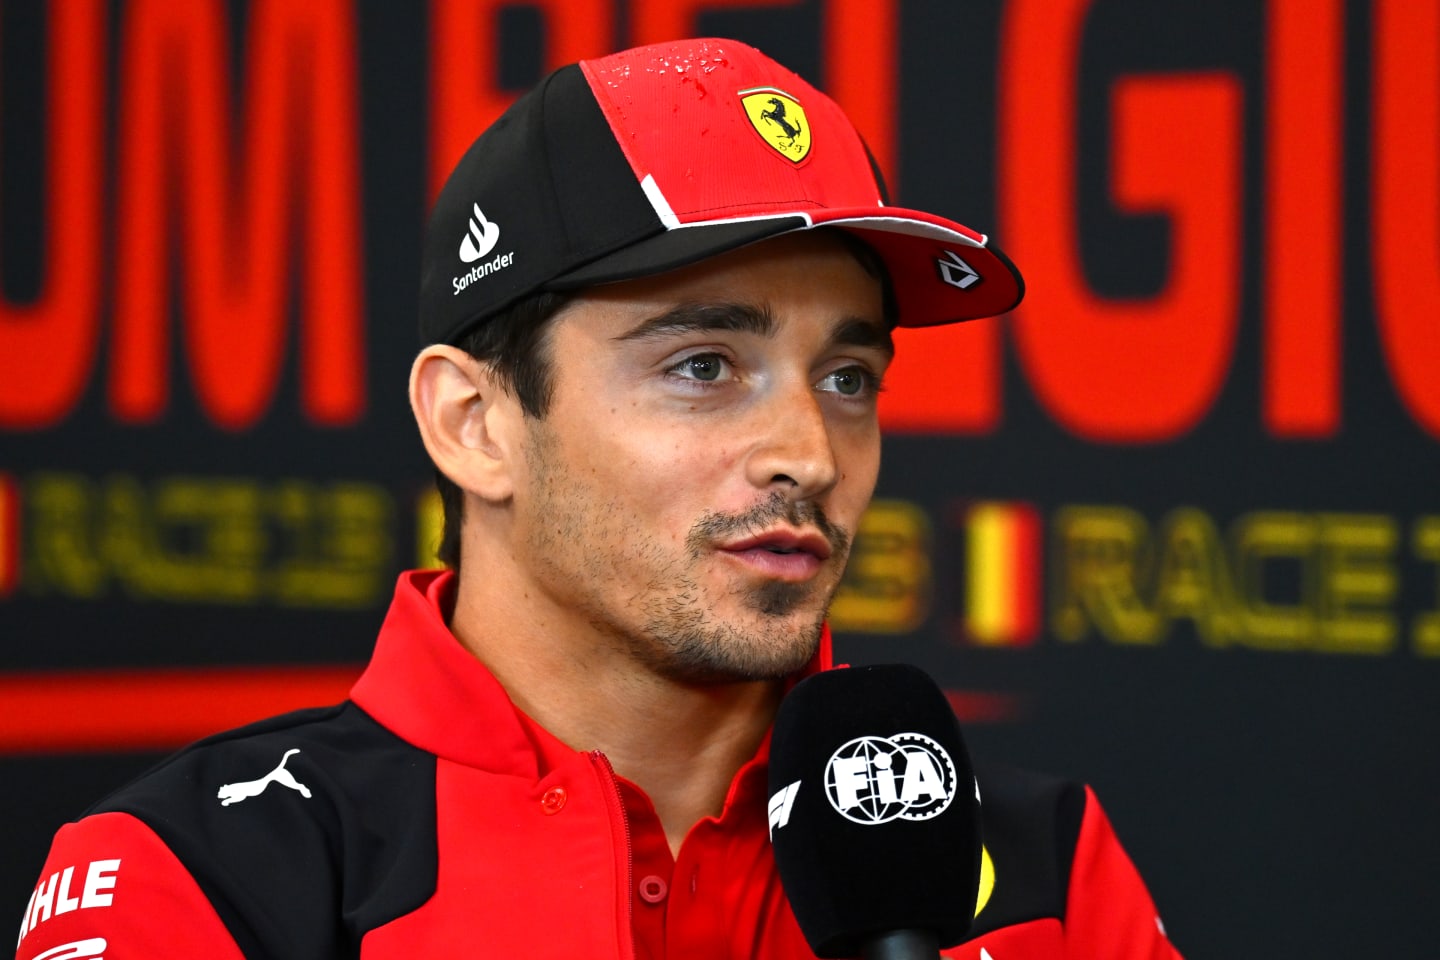 SPA, BELGIUM - JULY 27: Charles Leclerc of Monaco and Ferrari attends the Drivers Press Conference during previews ahead of the F1 Grand Prix of Belgium at Circuit de Spa-Francorchamps on July 27, 2023 in Spa, Belgium. (Photo by Dan Mullan/Getty Images)